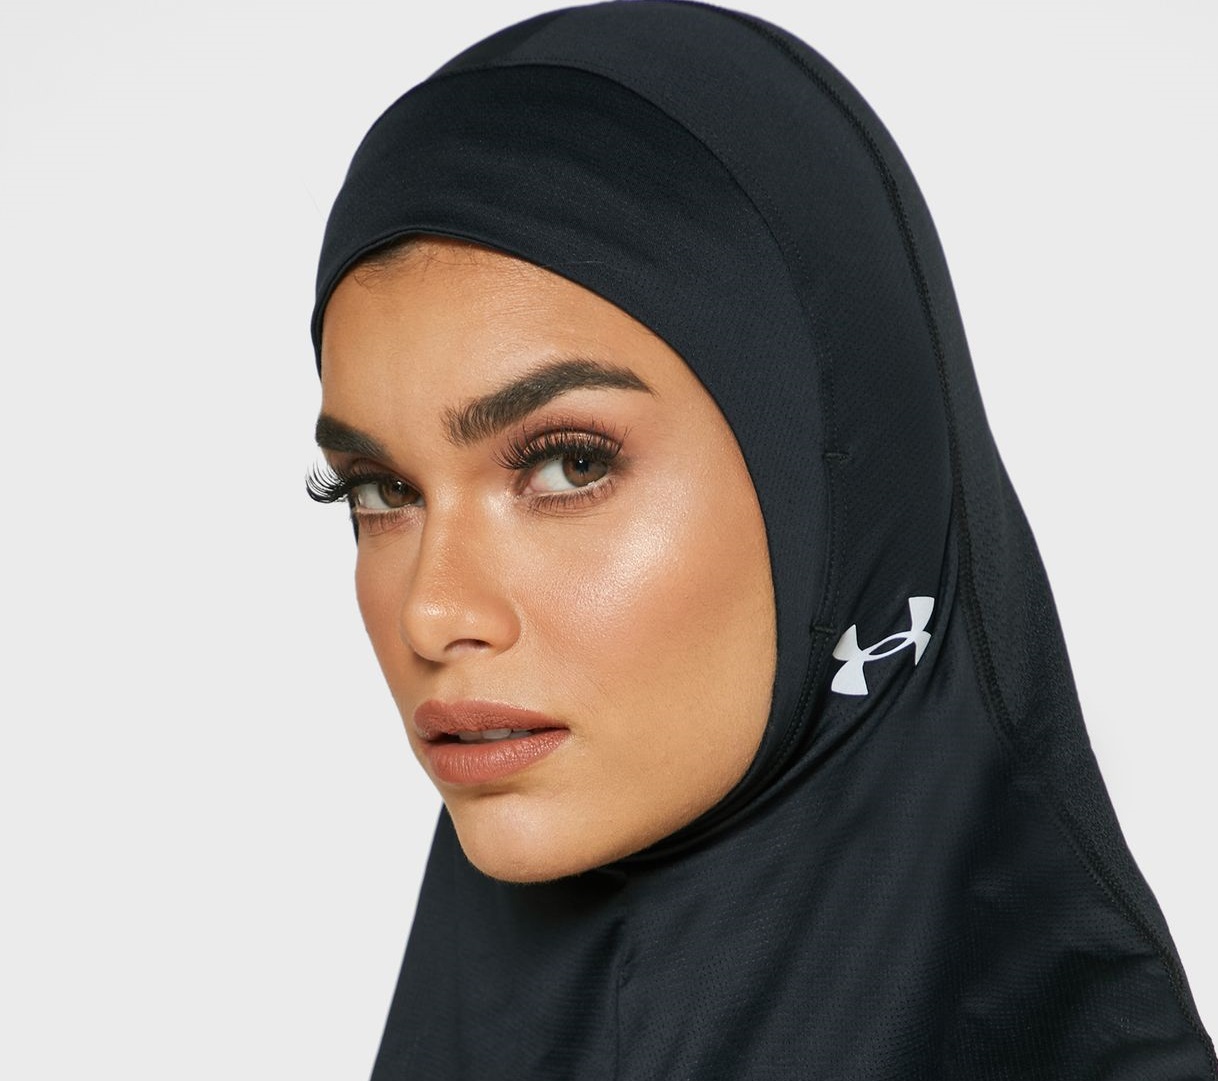 US Sports Clothing Co. Unveils First Hijab for Muslim Athletes | About ...